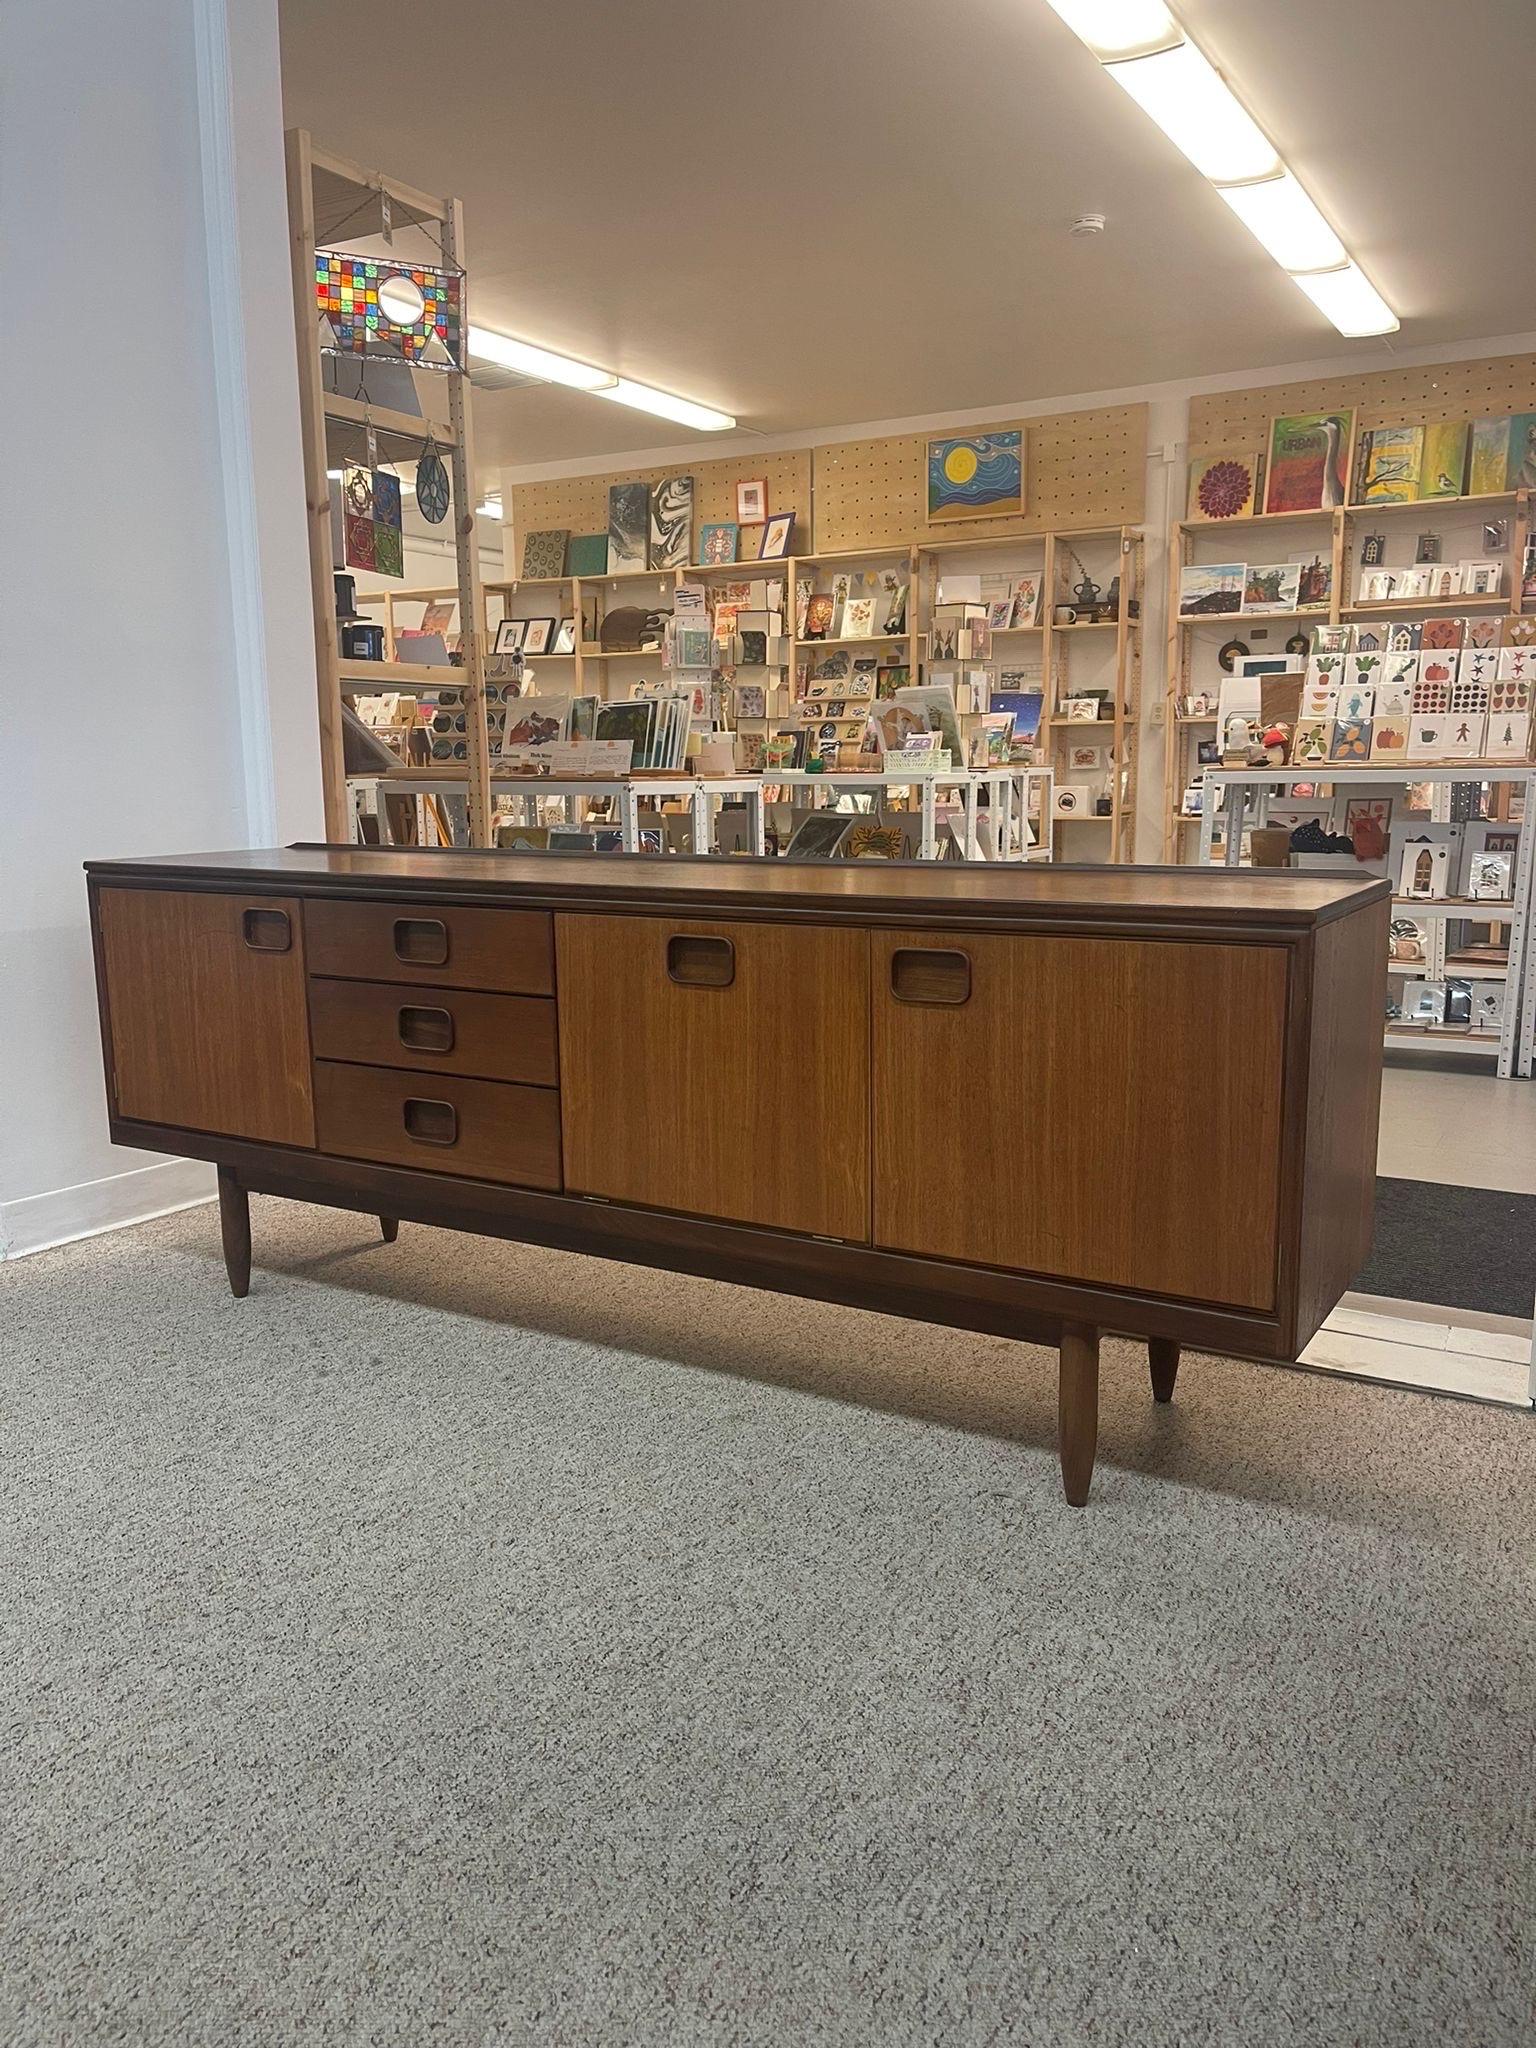 Late 20th Century Vintage Danish Modern Credenza Cabinet by William Lawrence of Nottingham For Sale